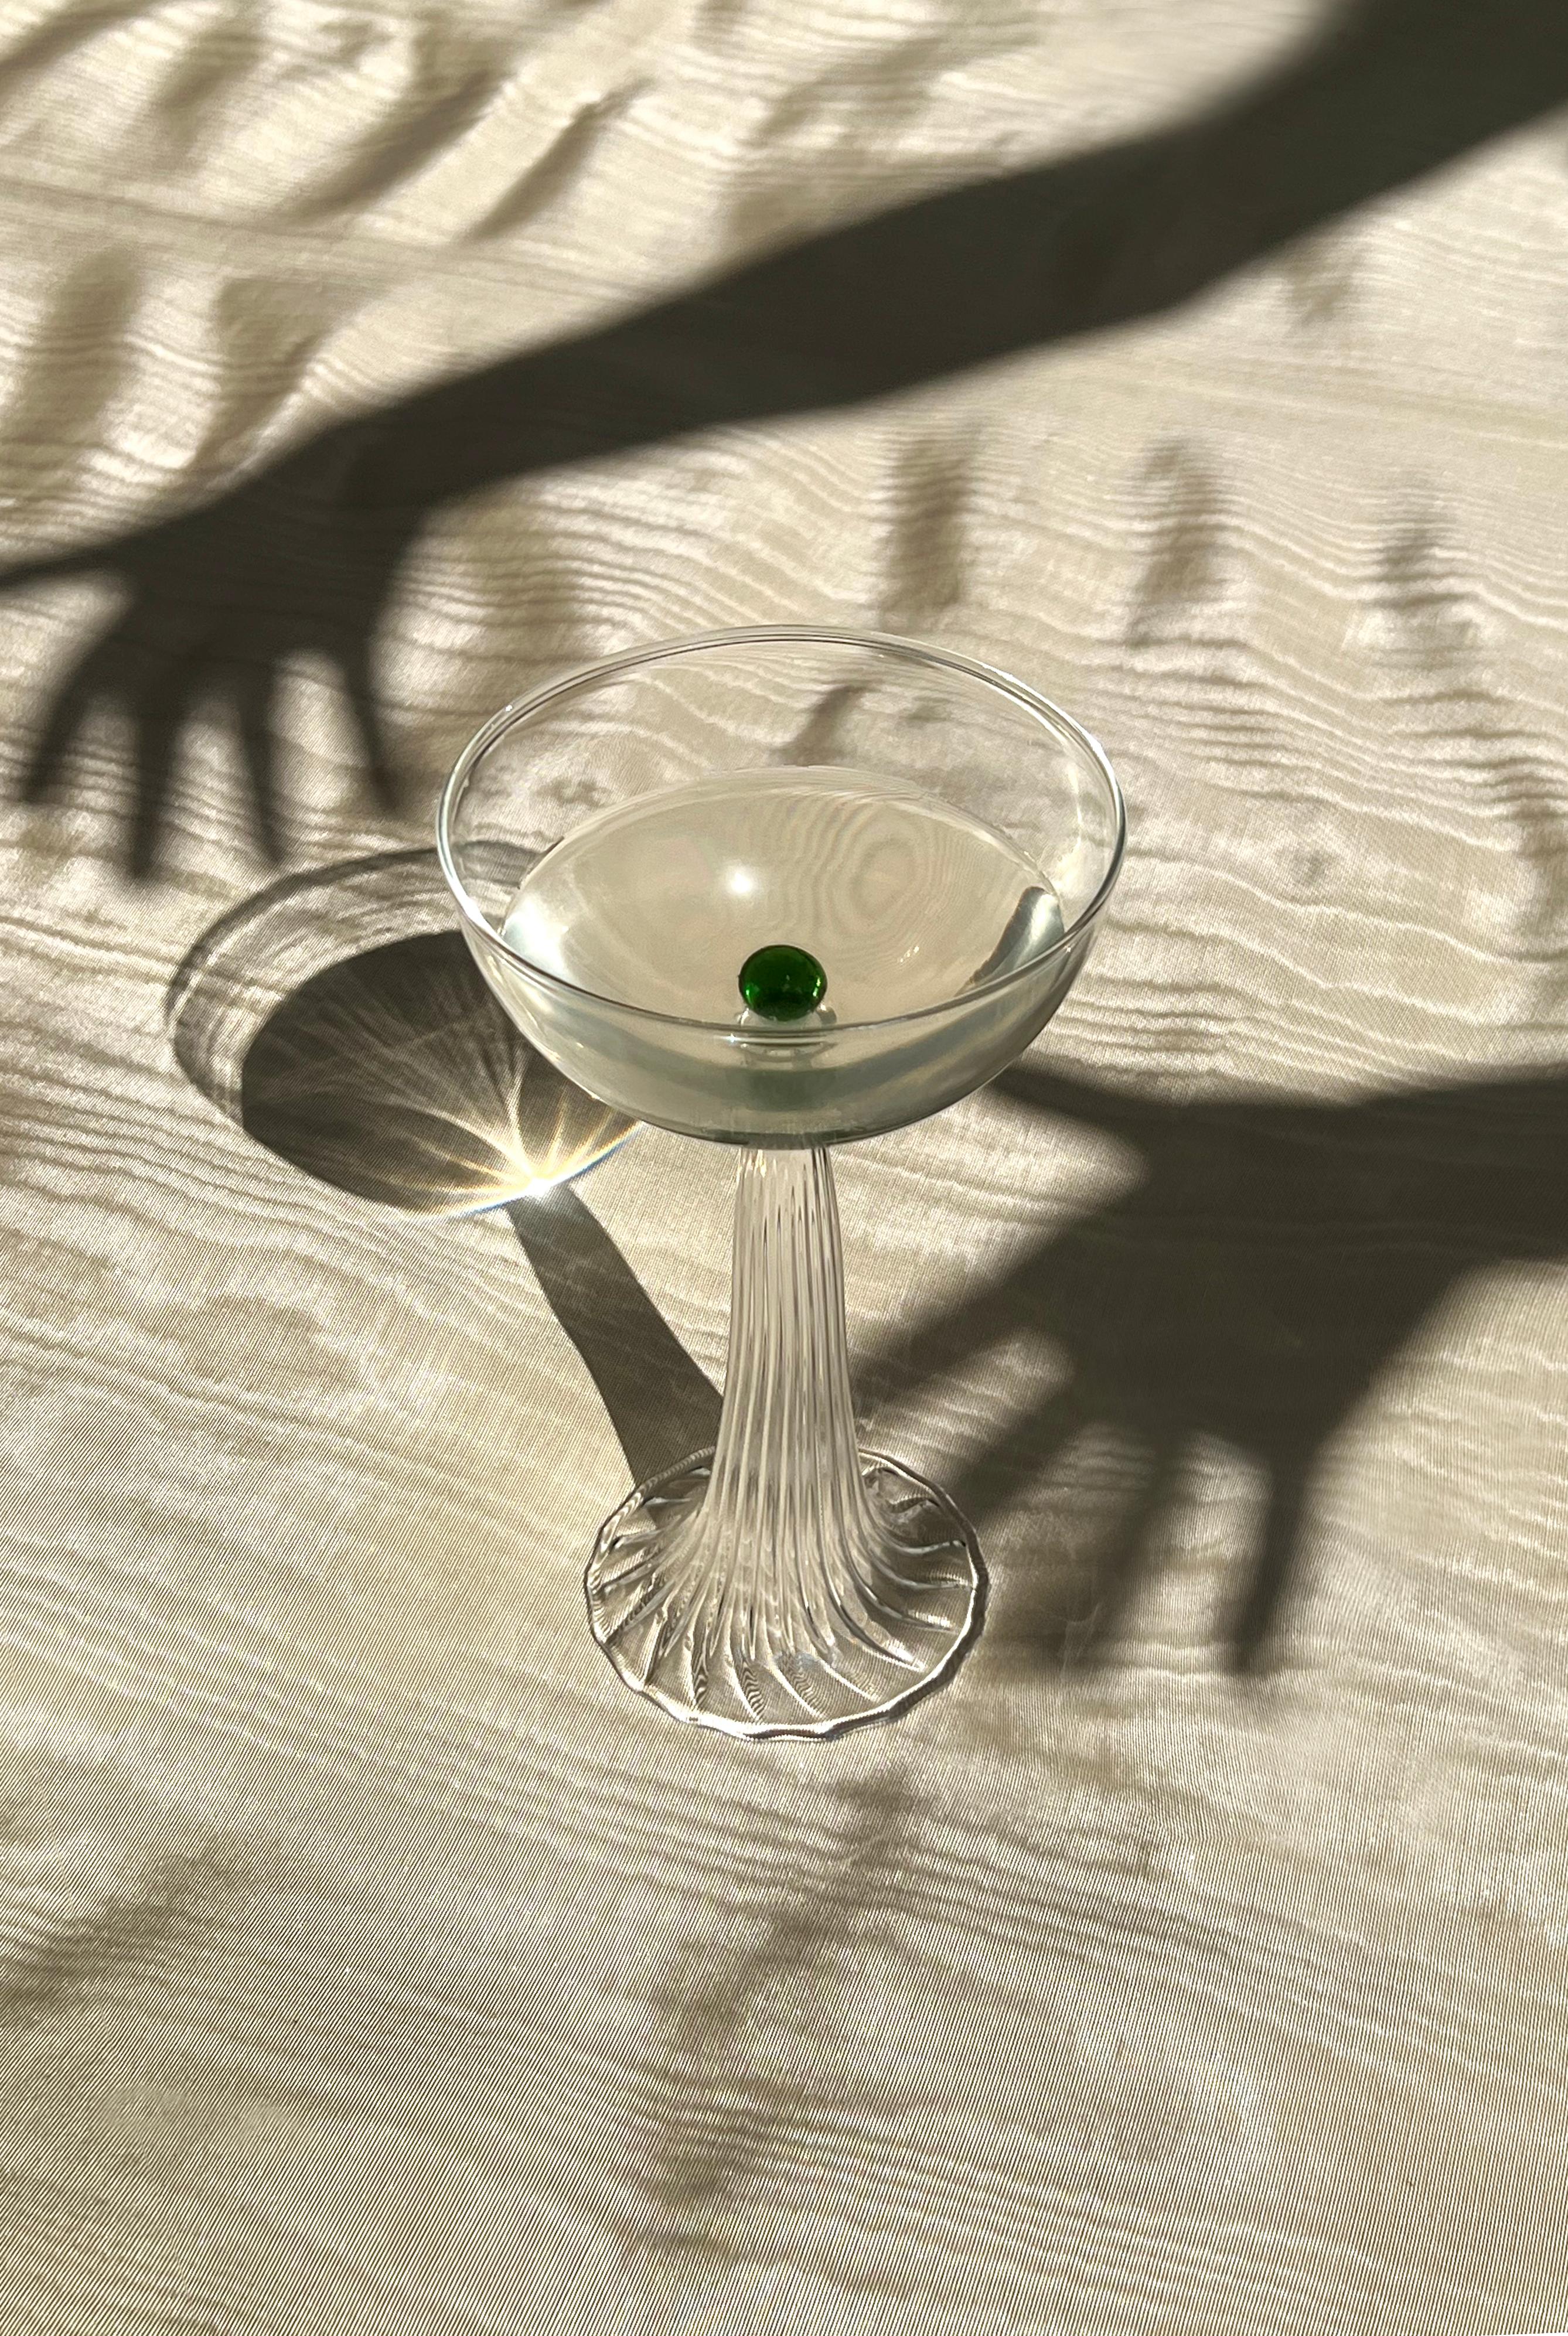 The  NEREIDA coupes reference an enchanting mythological undersea world. The highly sculptural design holds a delicate colored glass sphere, as a precious pearl.

Each piece is handmade in Italy by master glassblowers using high-quality borosilicate